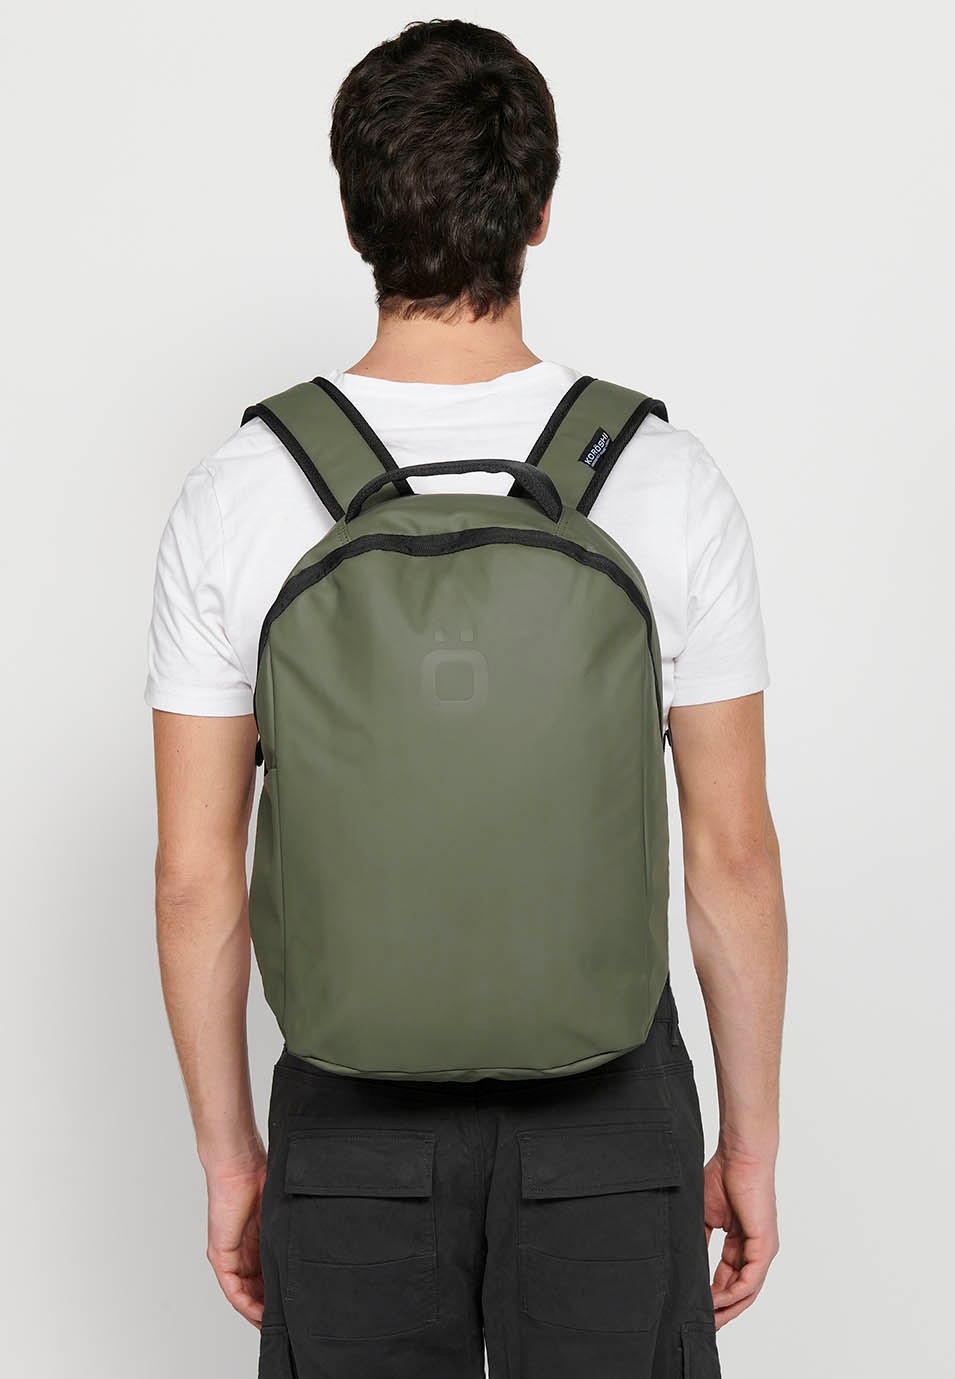 Koröshi Backpack with zipper closure and interior laptop pocket in Khaki color 8